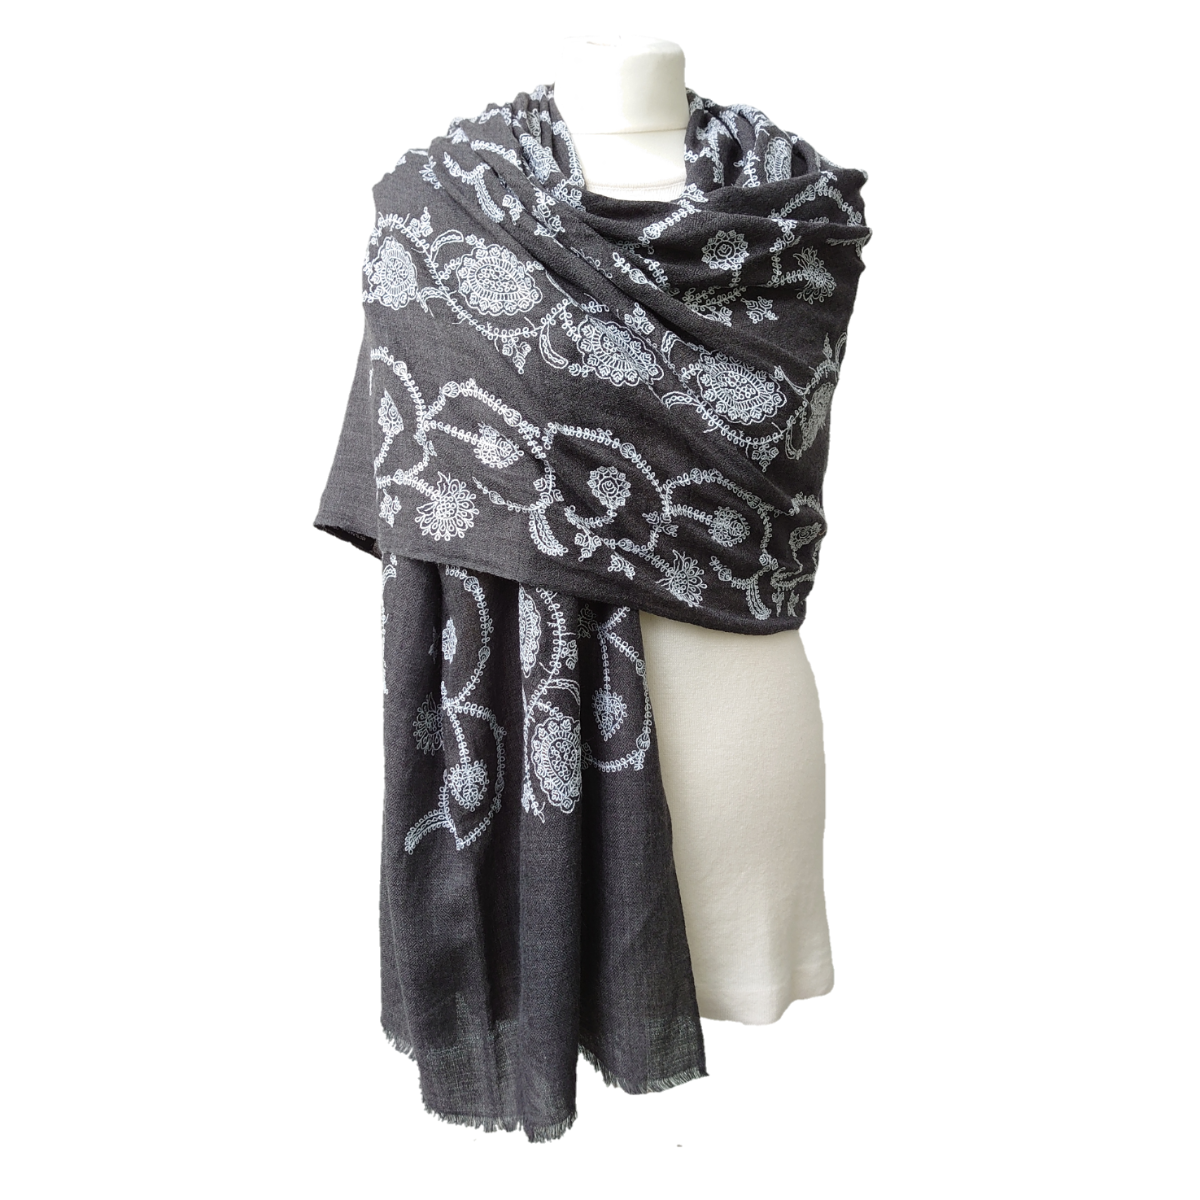 Fine Pashmina Stole - Large Scarf - Dark Grey with White Embroidered Design